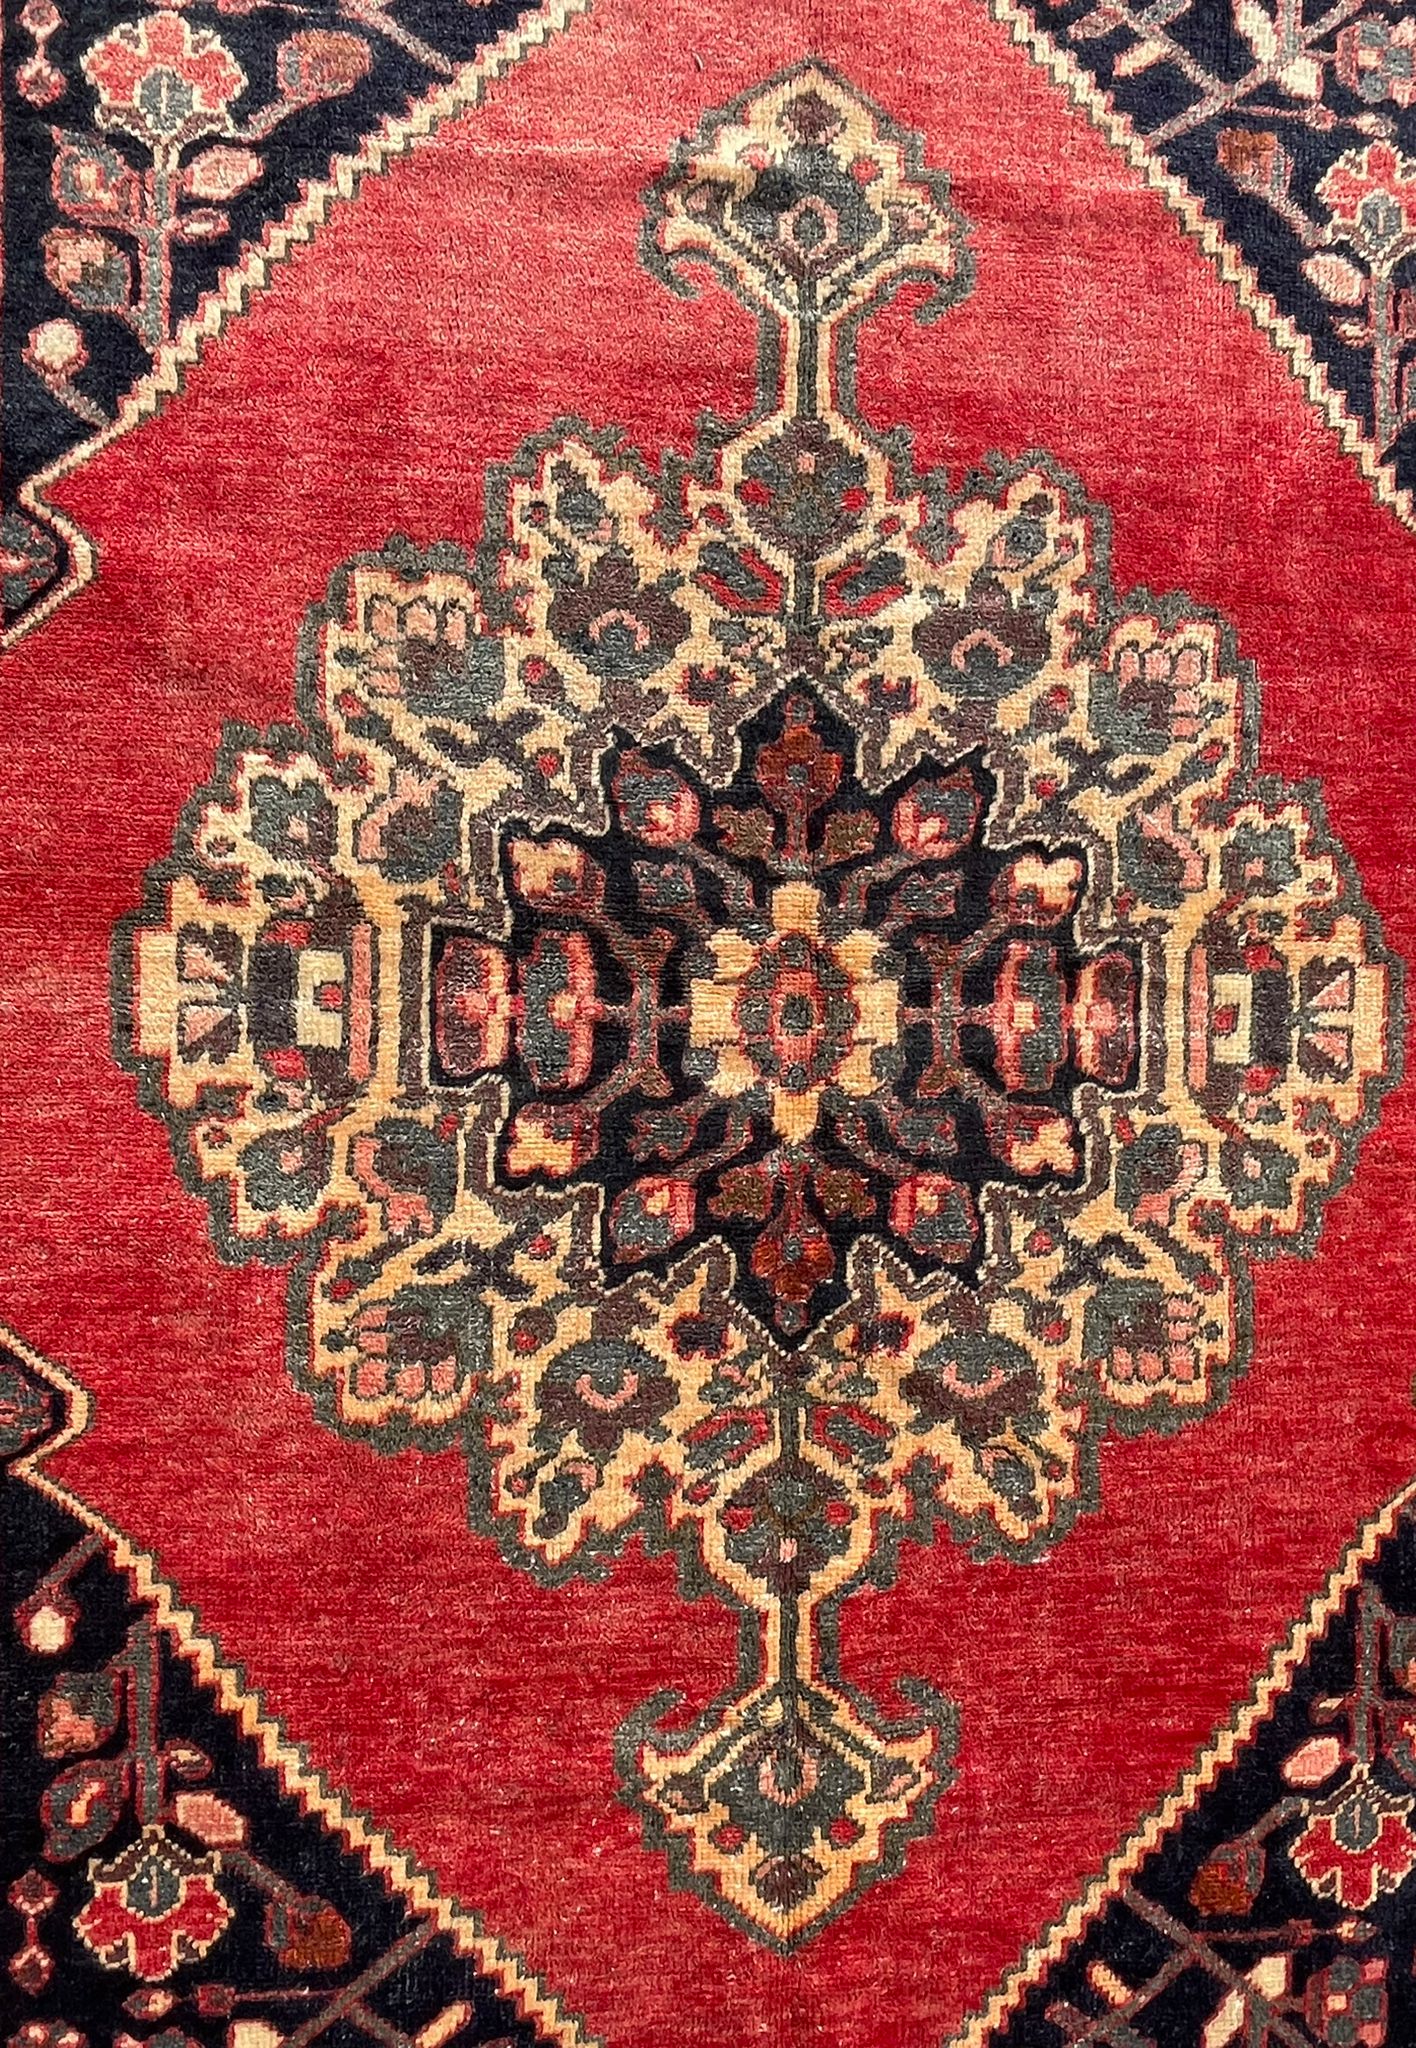 AN EARLY 20TH CENTURY HAND KNOTTED PERSIAN BAKHTIAR RUG